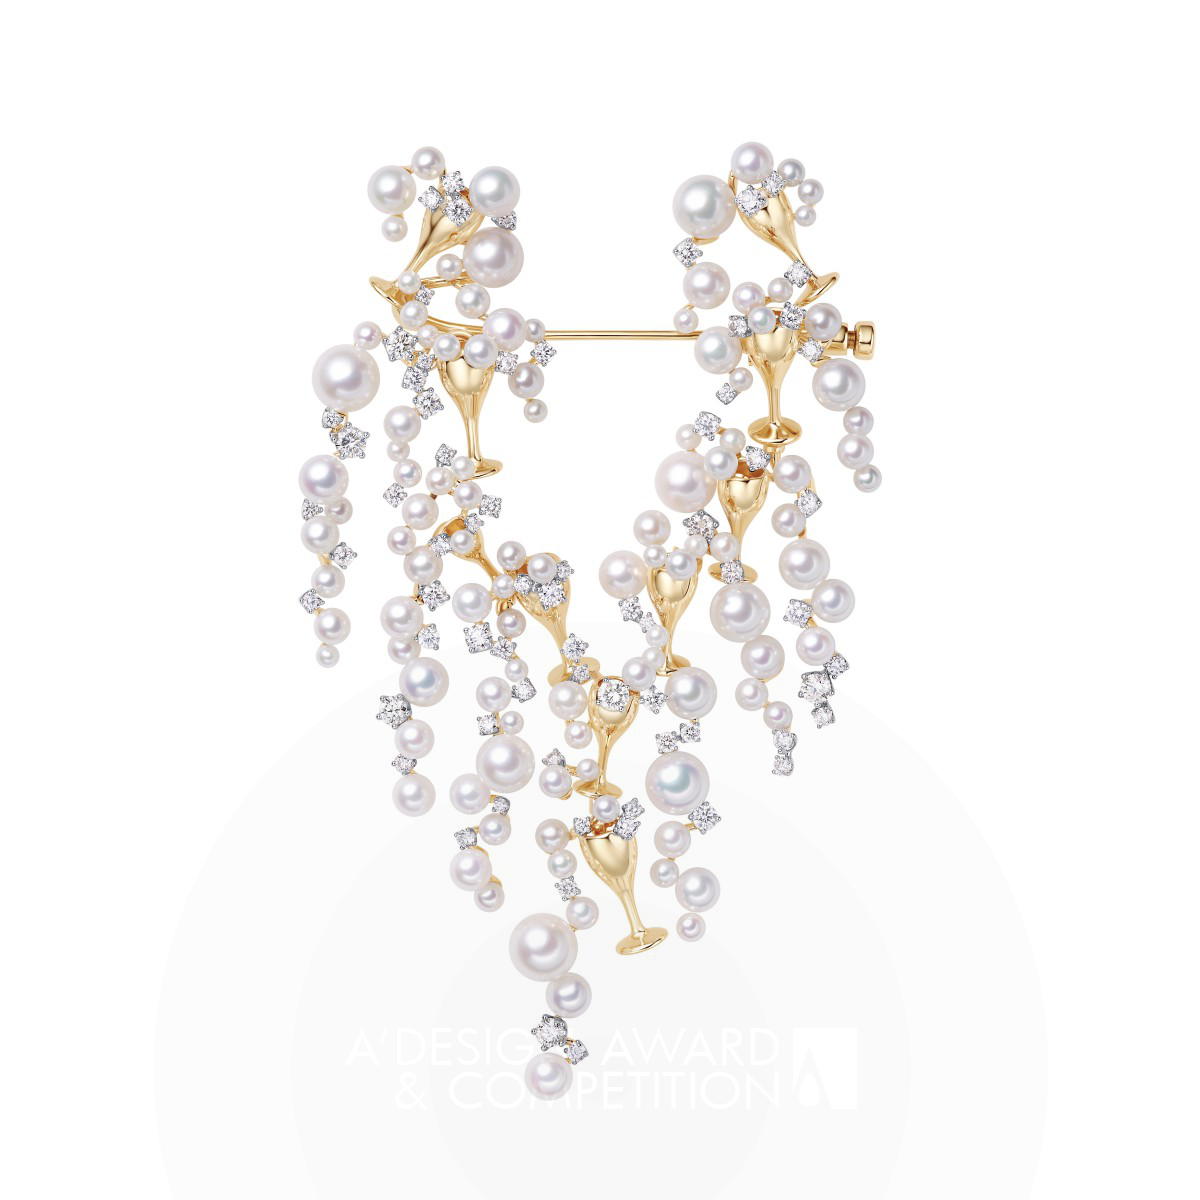 Yunhua Cheng wins Bronze at the prestigious A' Jewelry Design Award with Cheers Brooch.